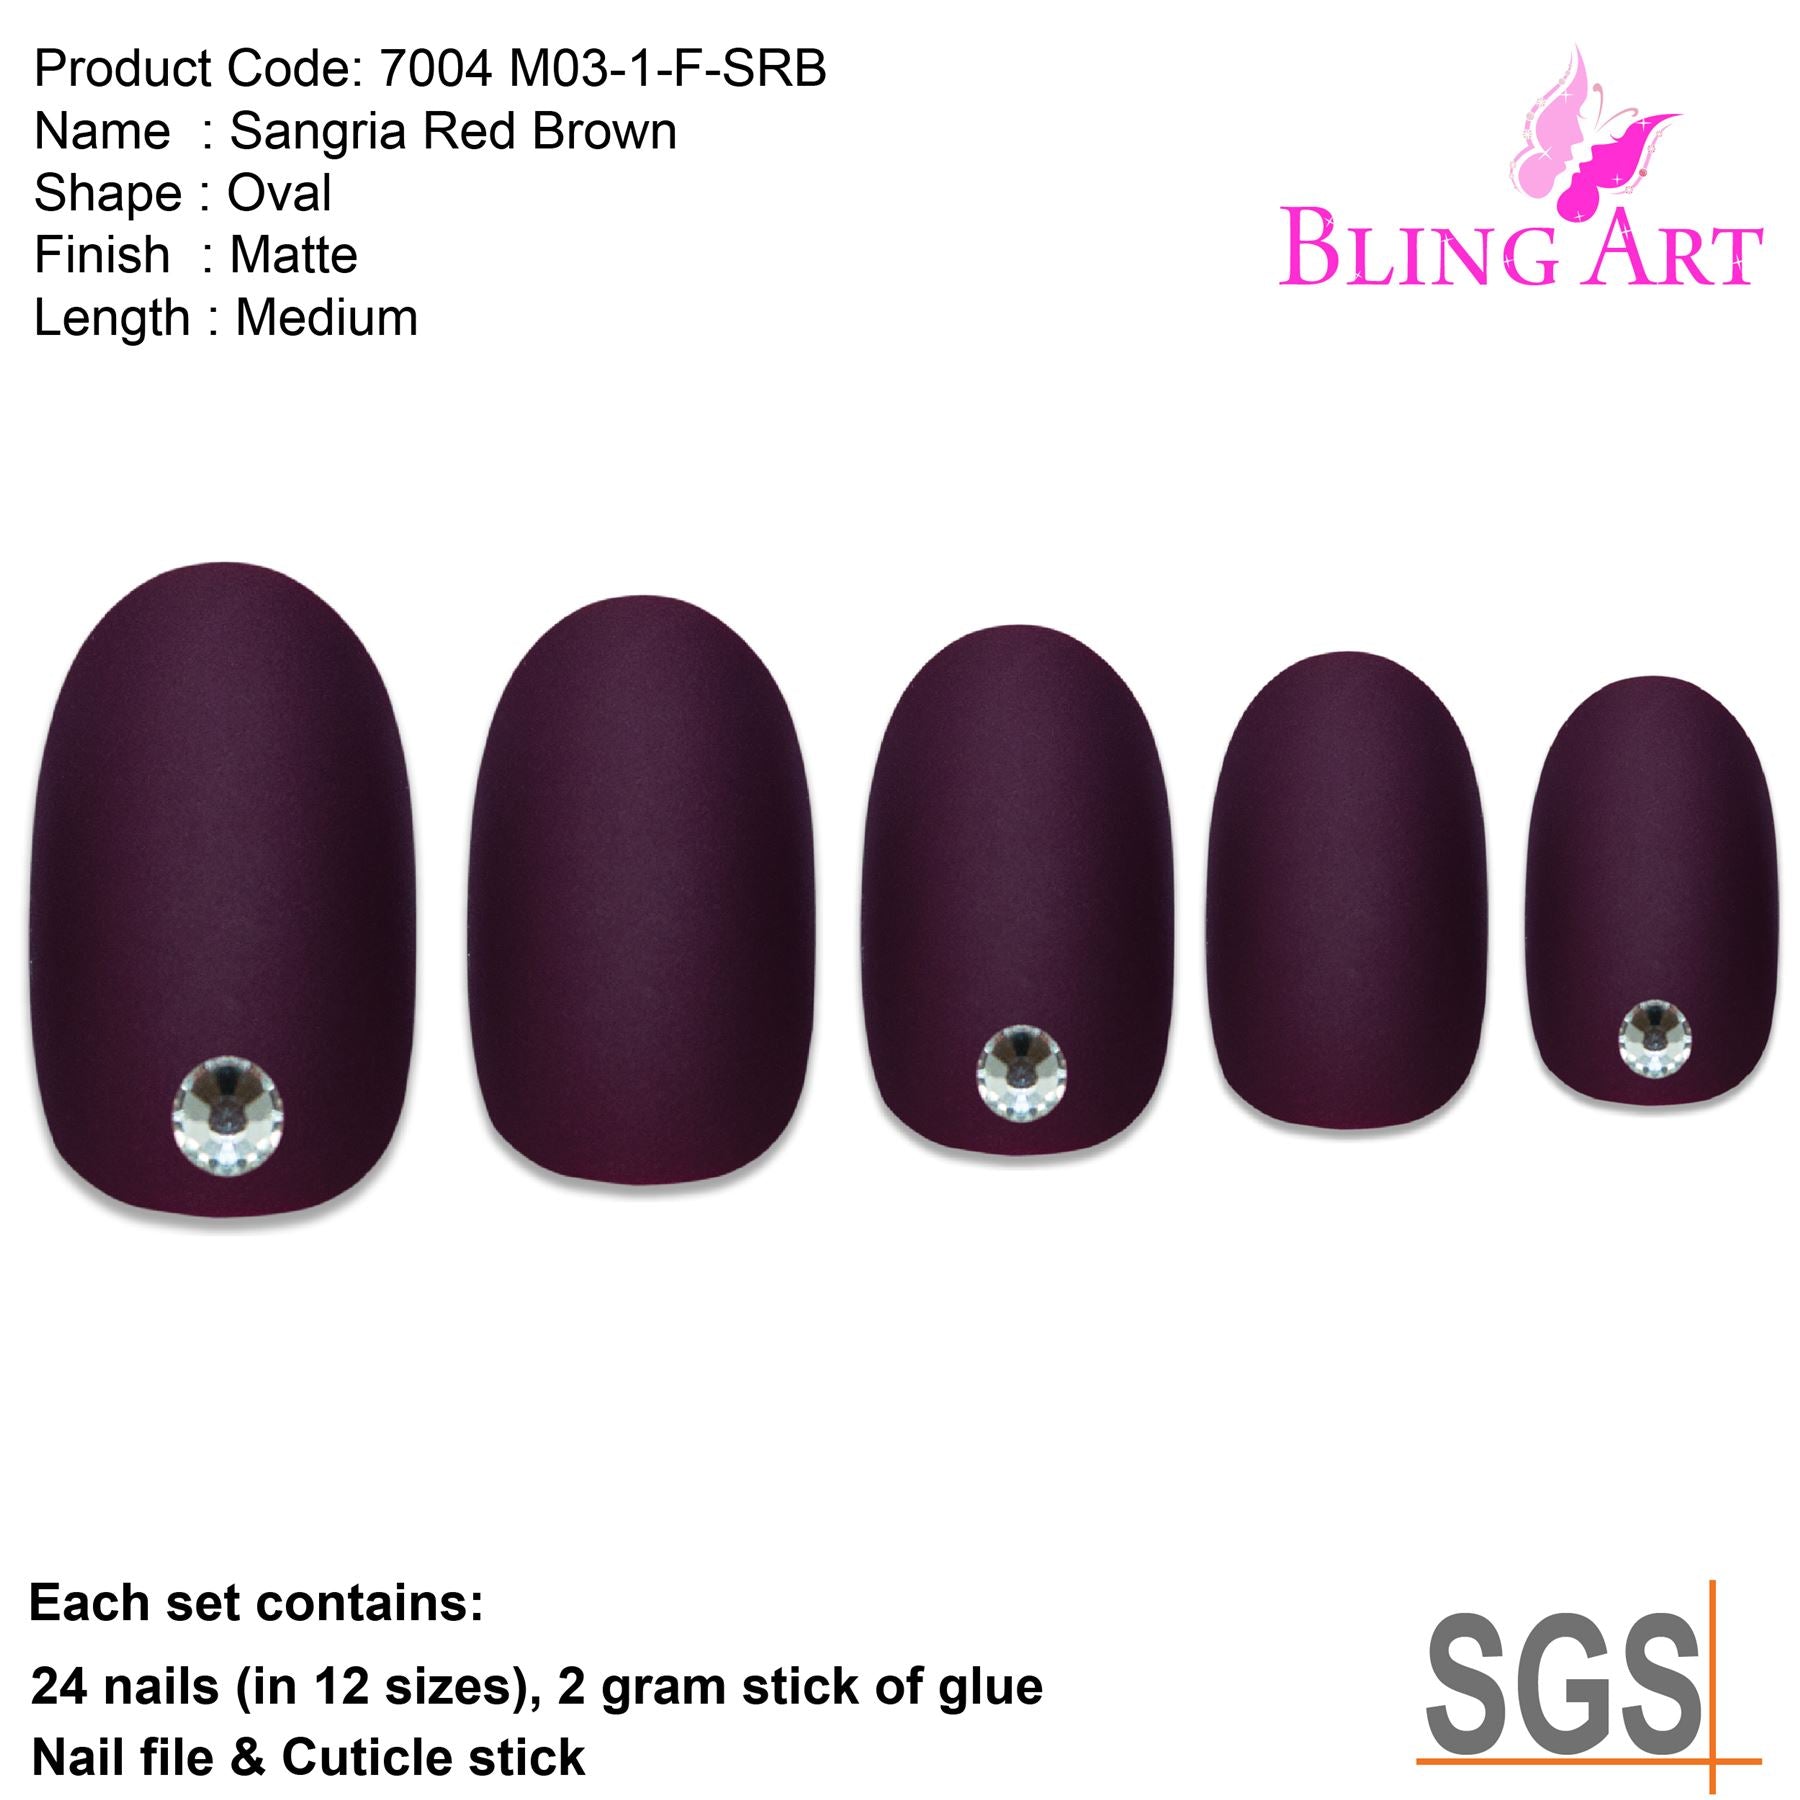 False Nails by Bling Art Red Brown Matte Oval Medium Fake Acrylic Tips Glue